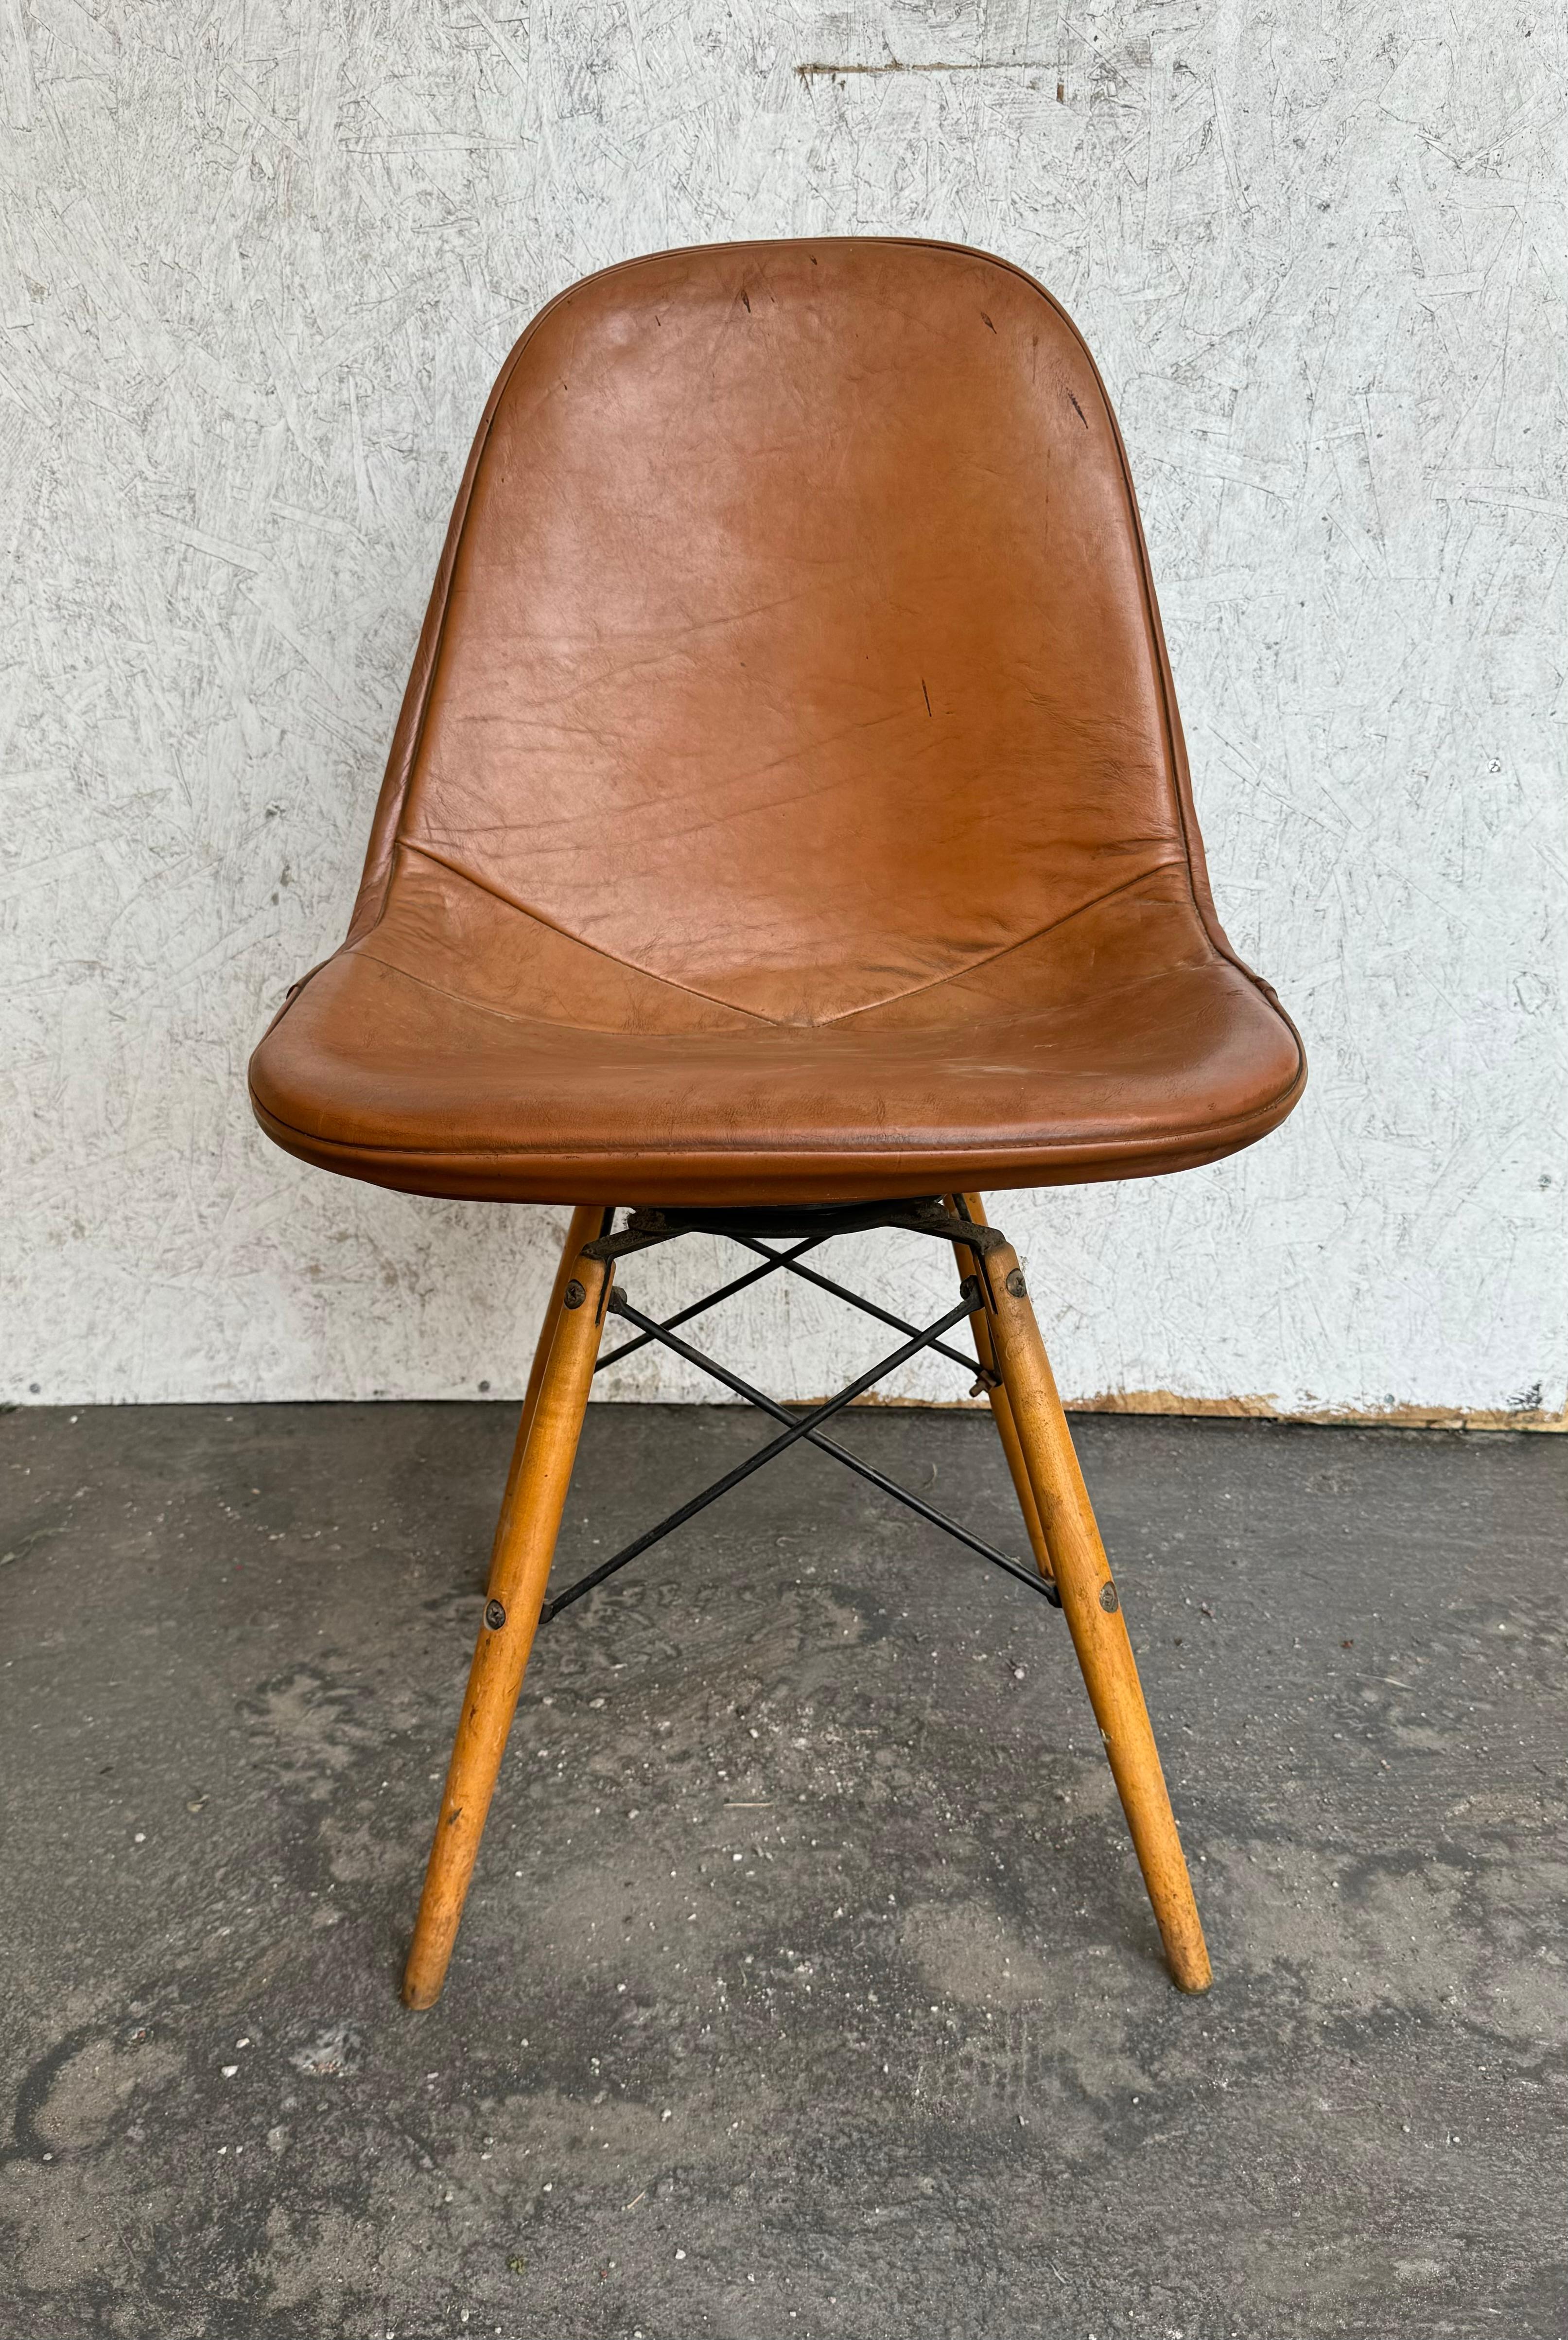 Early Pkw-1 Pivoting K-Wire Dowel Wood Base Side Chair, Eames Herman Miller In Good Condition For Sale In Buffalo, NY